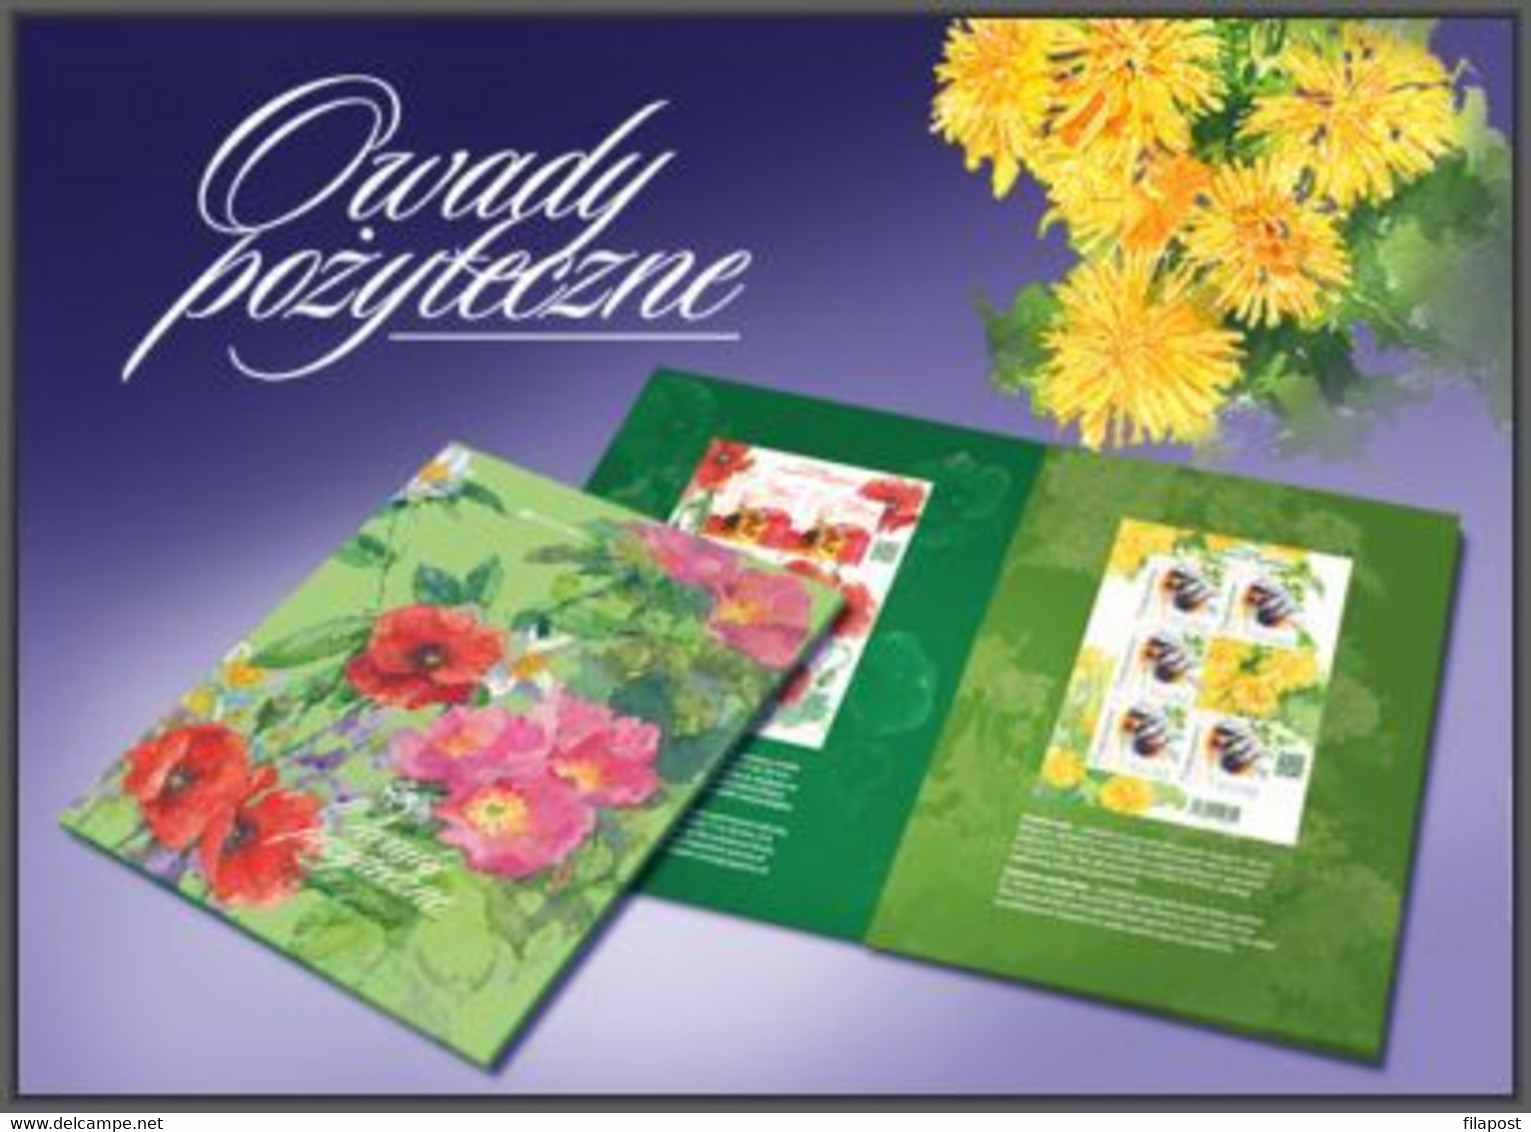 Poland 2021 Booklet Folder - Beneficial Insects / Bees And Bumblebees, Flowers, Insect, Animal Bee / Imperforated Sheets - Carnets